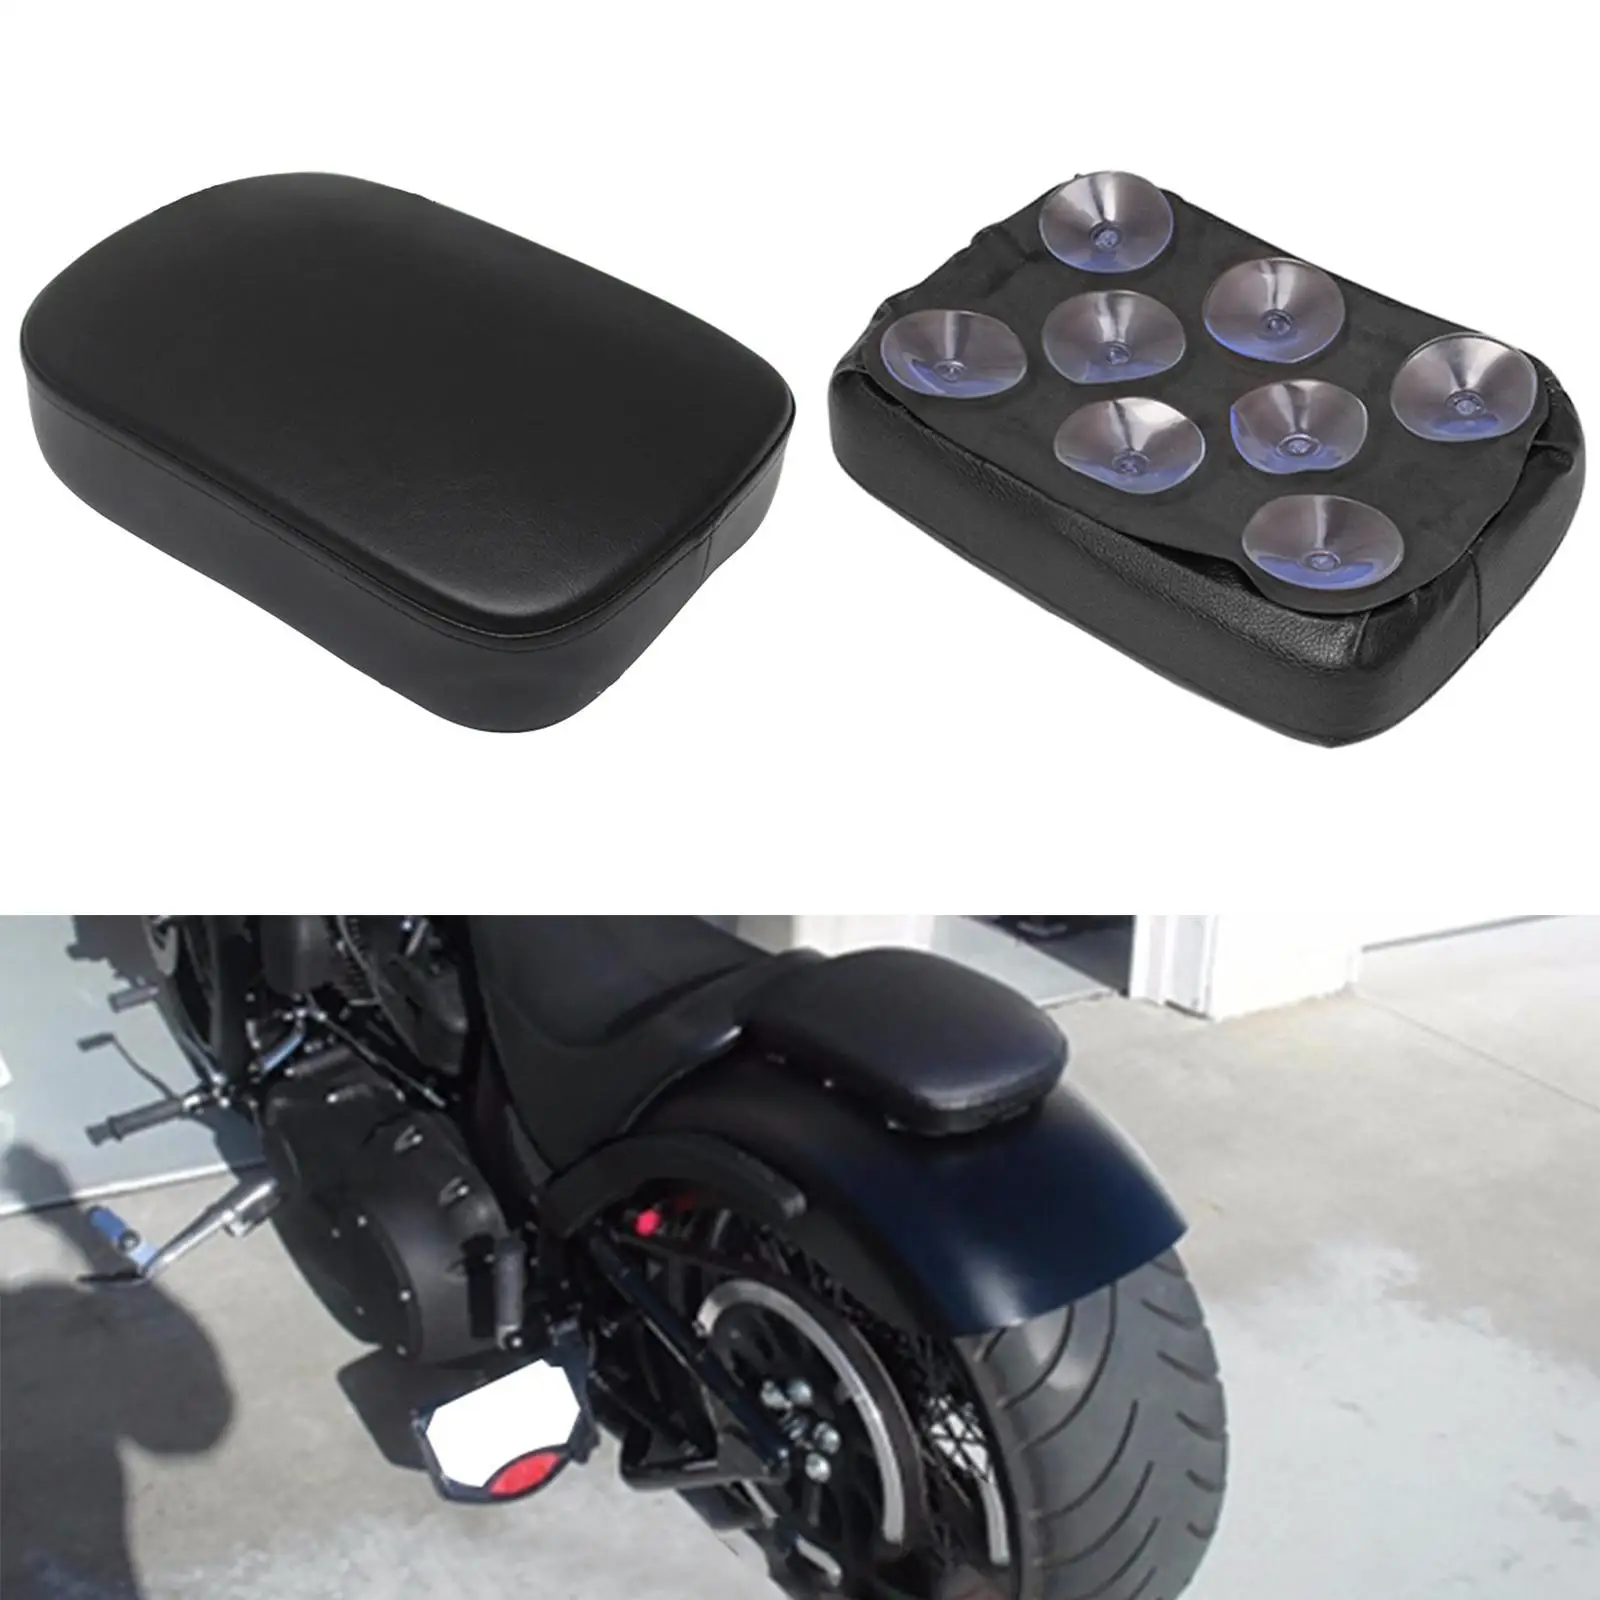 Motorcycle Pillion Seat Pad 8 Suction Cups Saddle Fit for Harley XL883 1200